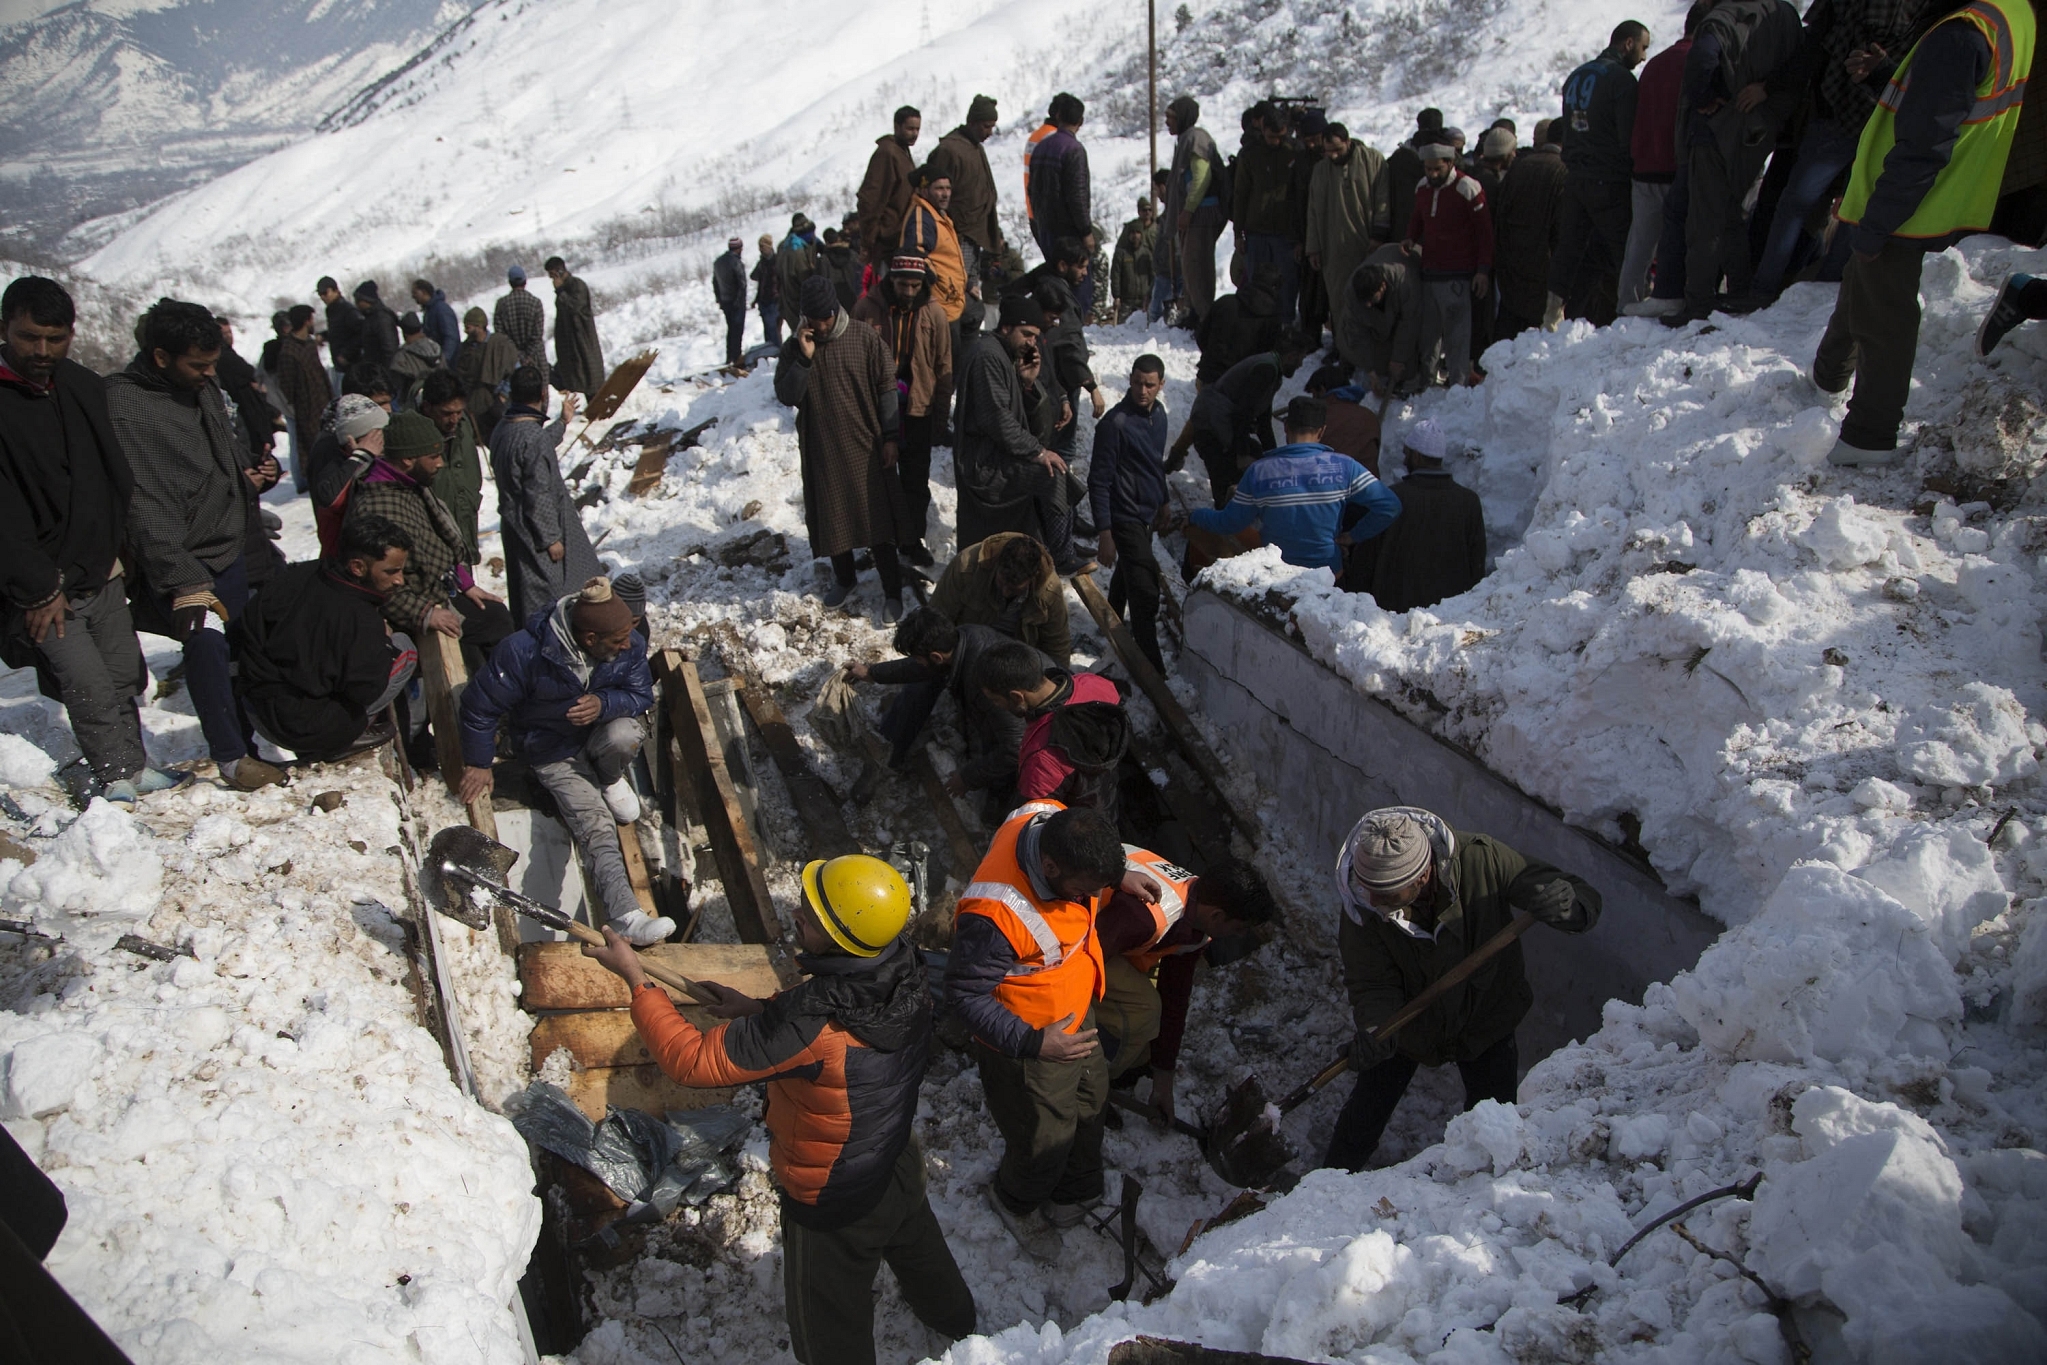 A search and rescue operation under way (Photo by Waseem Andrabi/Hindustan Times via Getty Images)